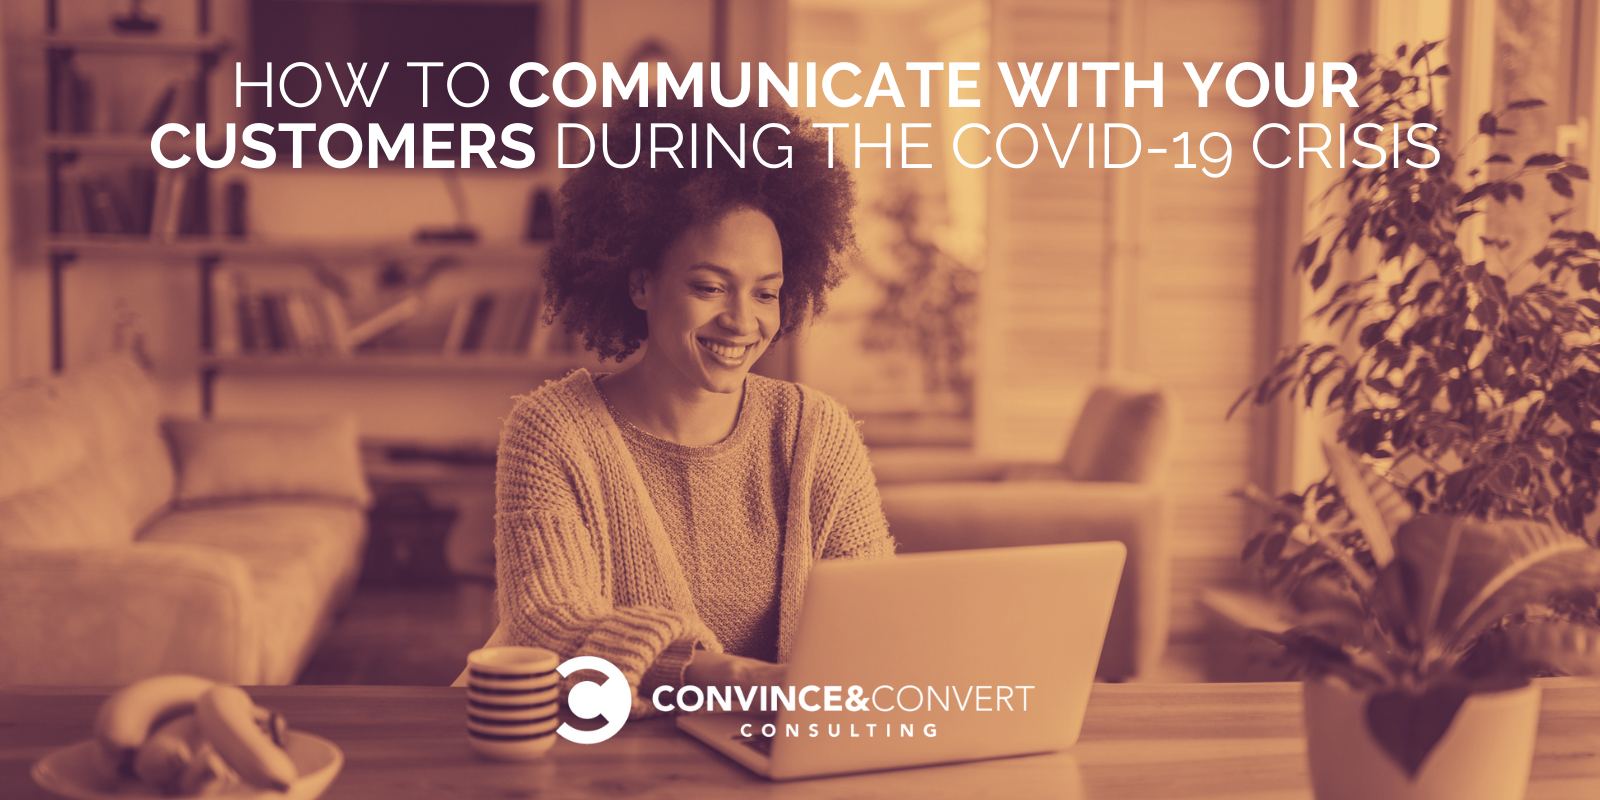 5 How to Communicate with Your Customers During the COVID-19